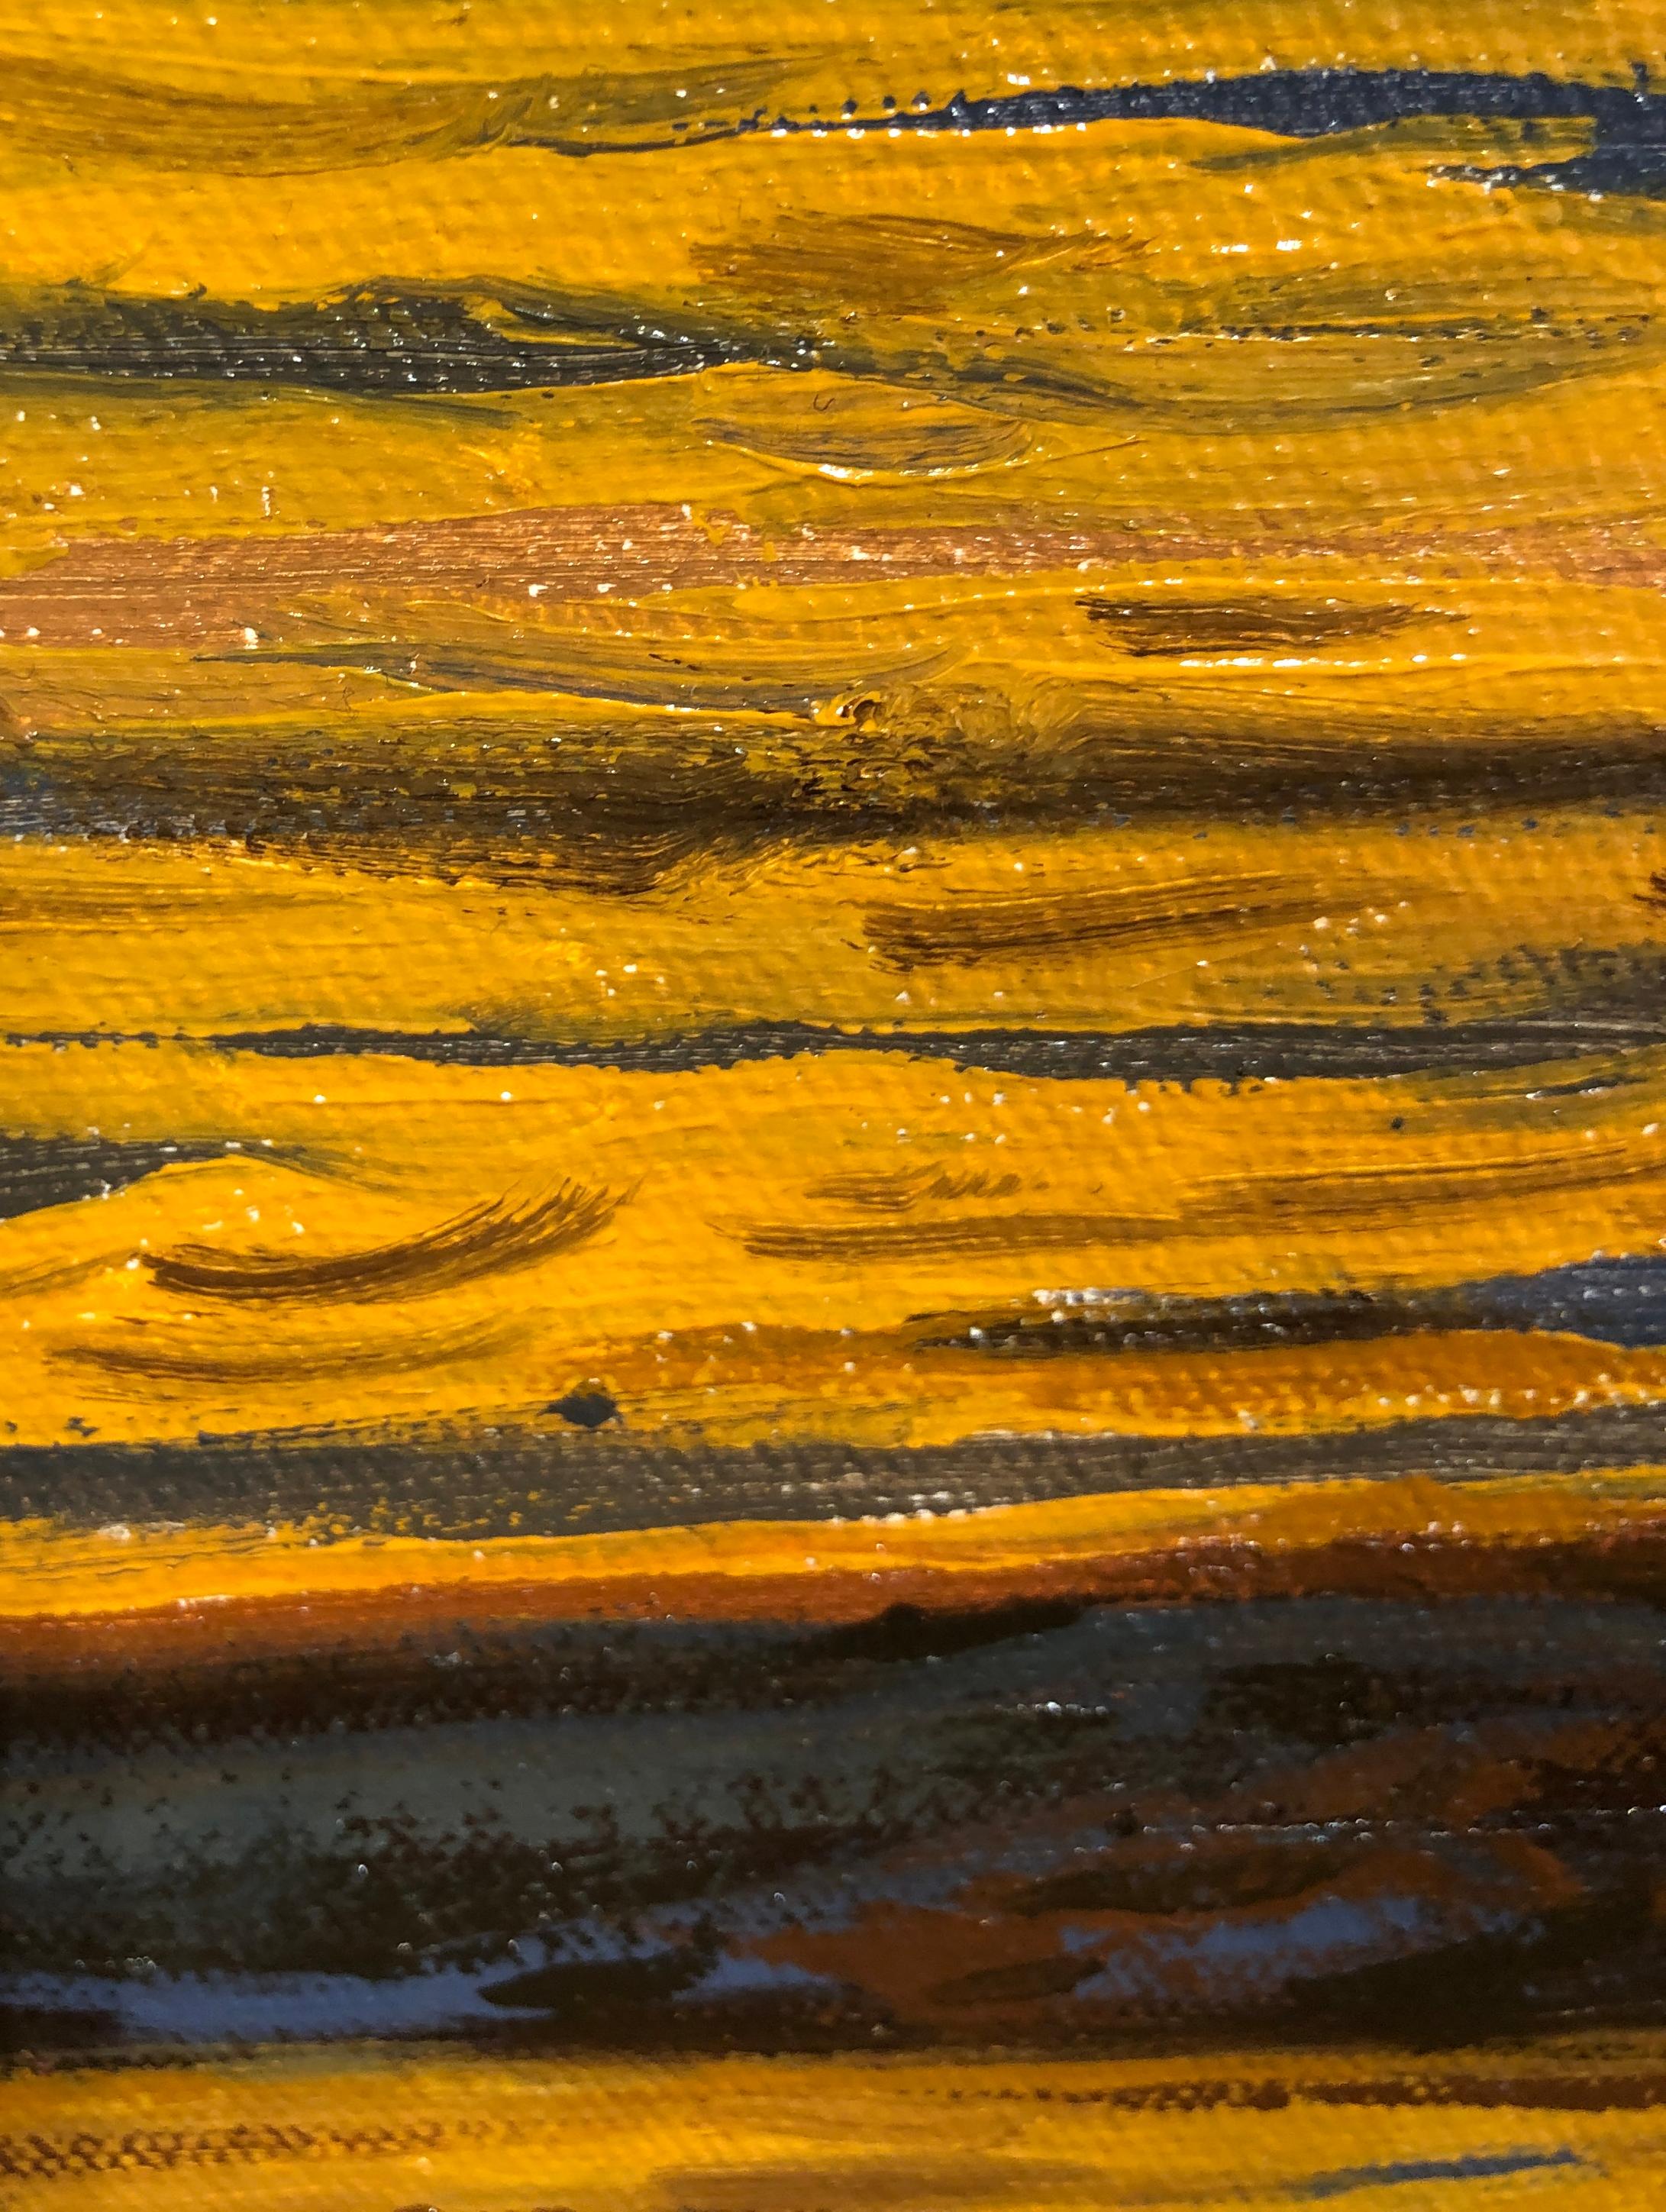 Oceans XIV - Original Oil Painting of Golden Sunset Reflected on Water 8